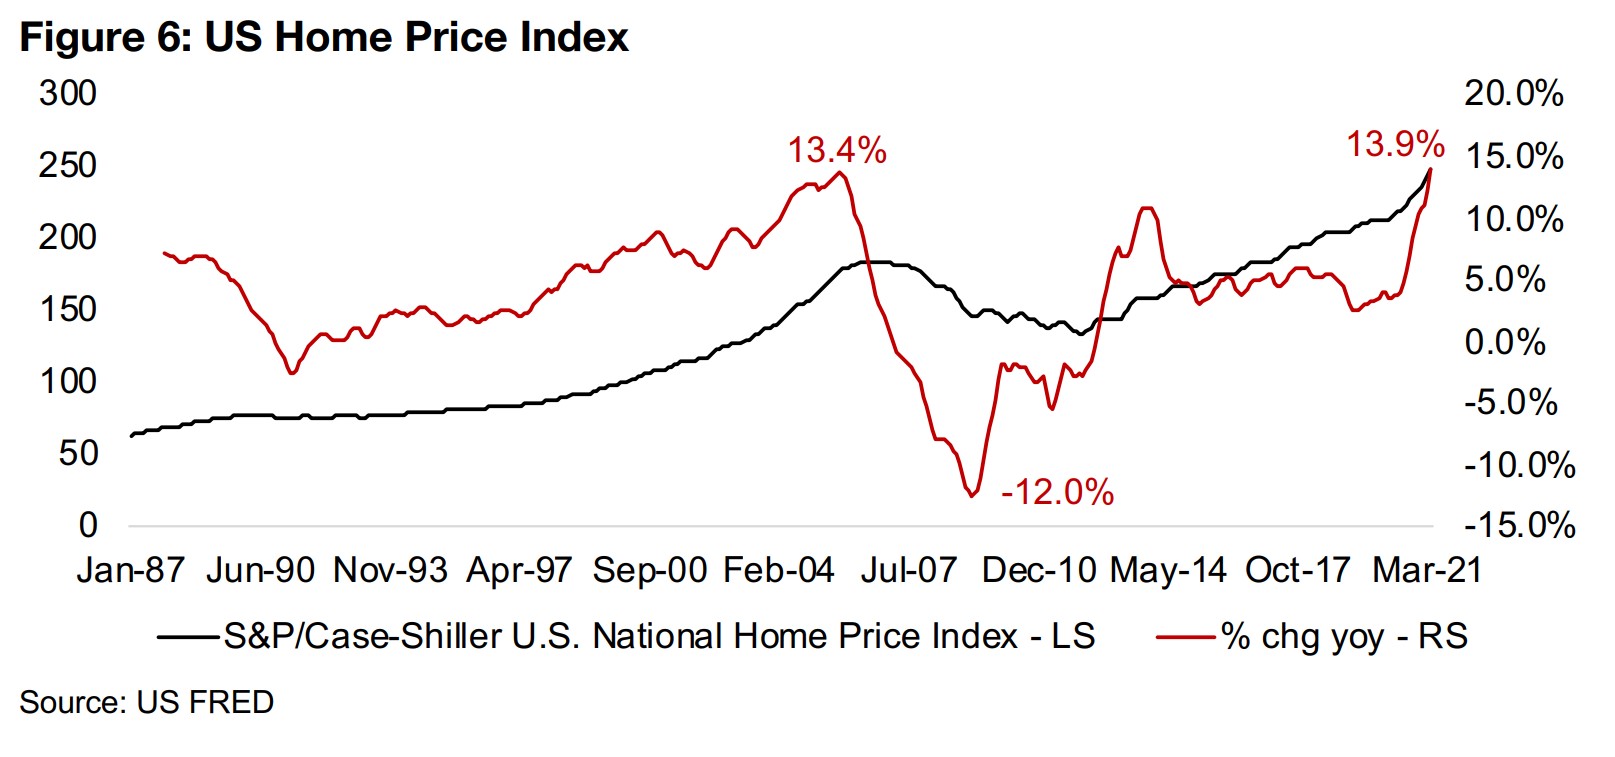 Housing Bubble 2.0? The US housing market another inflationary driver